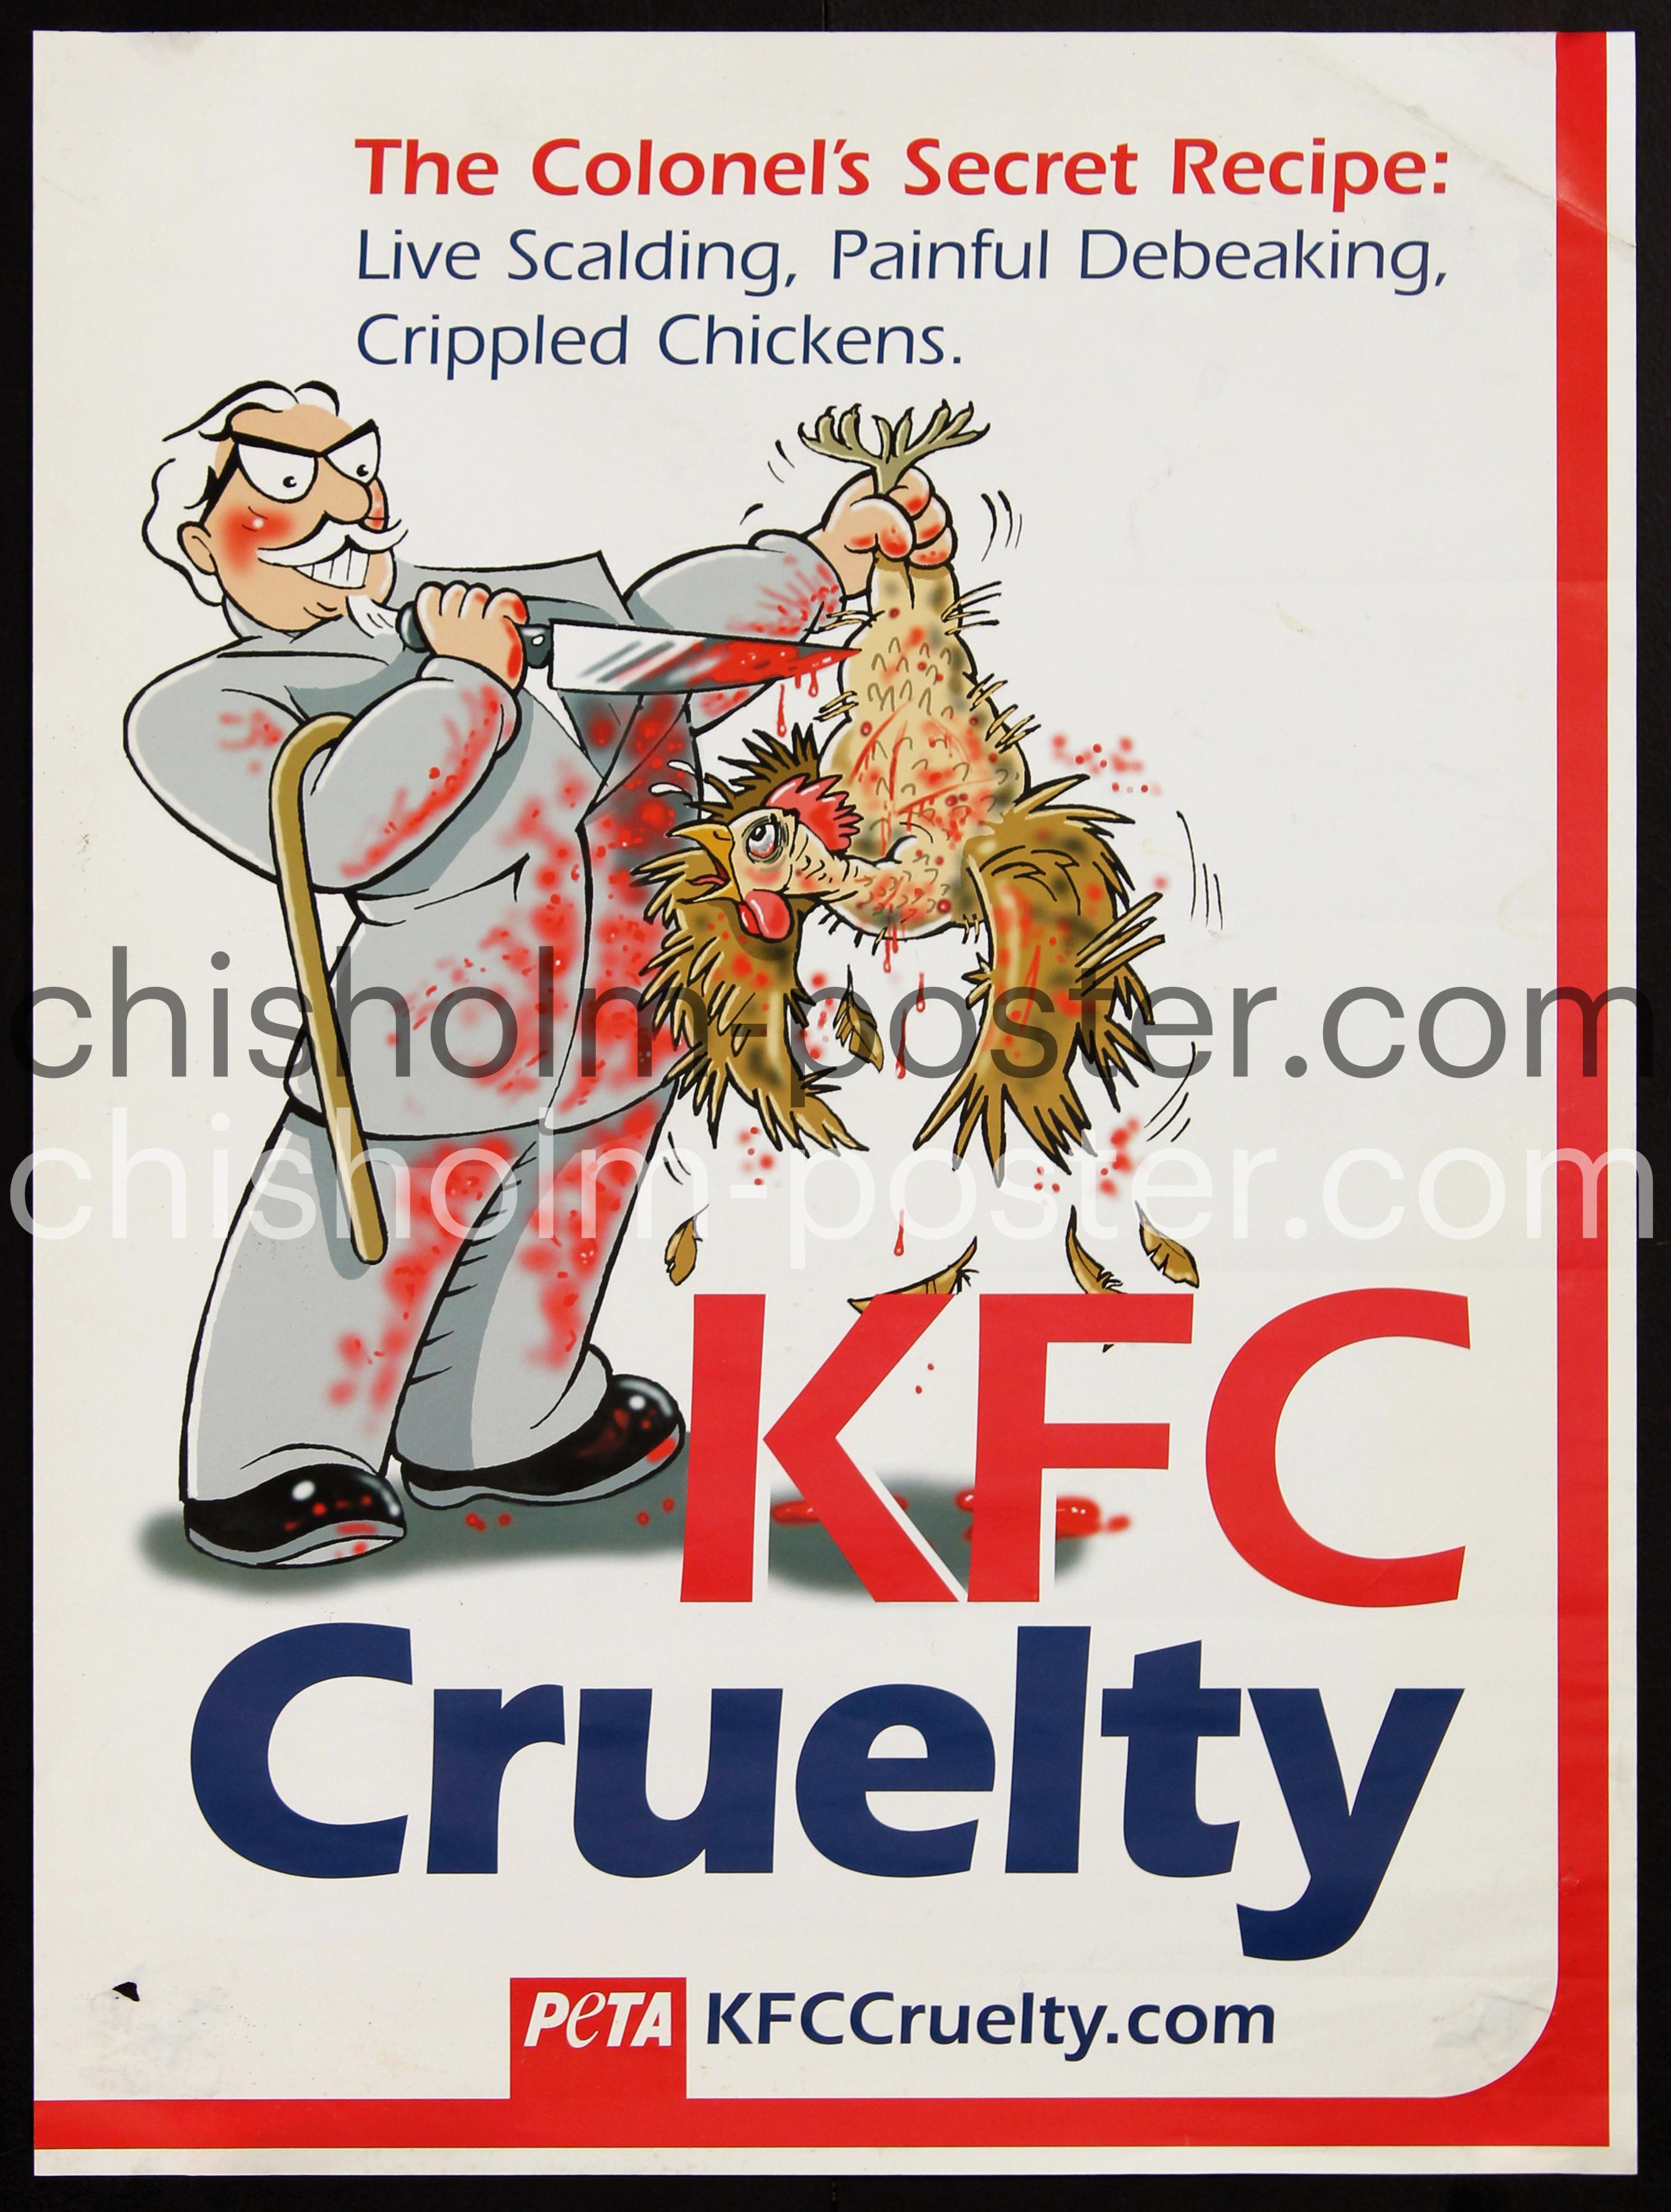 KFC Cruelty - The Colonel's Secret Recipe: Live Scalding, Painful  Debeaking, Crippled Chickens, Original Vintage Poster